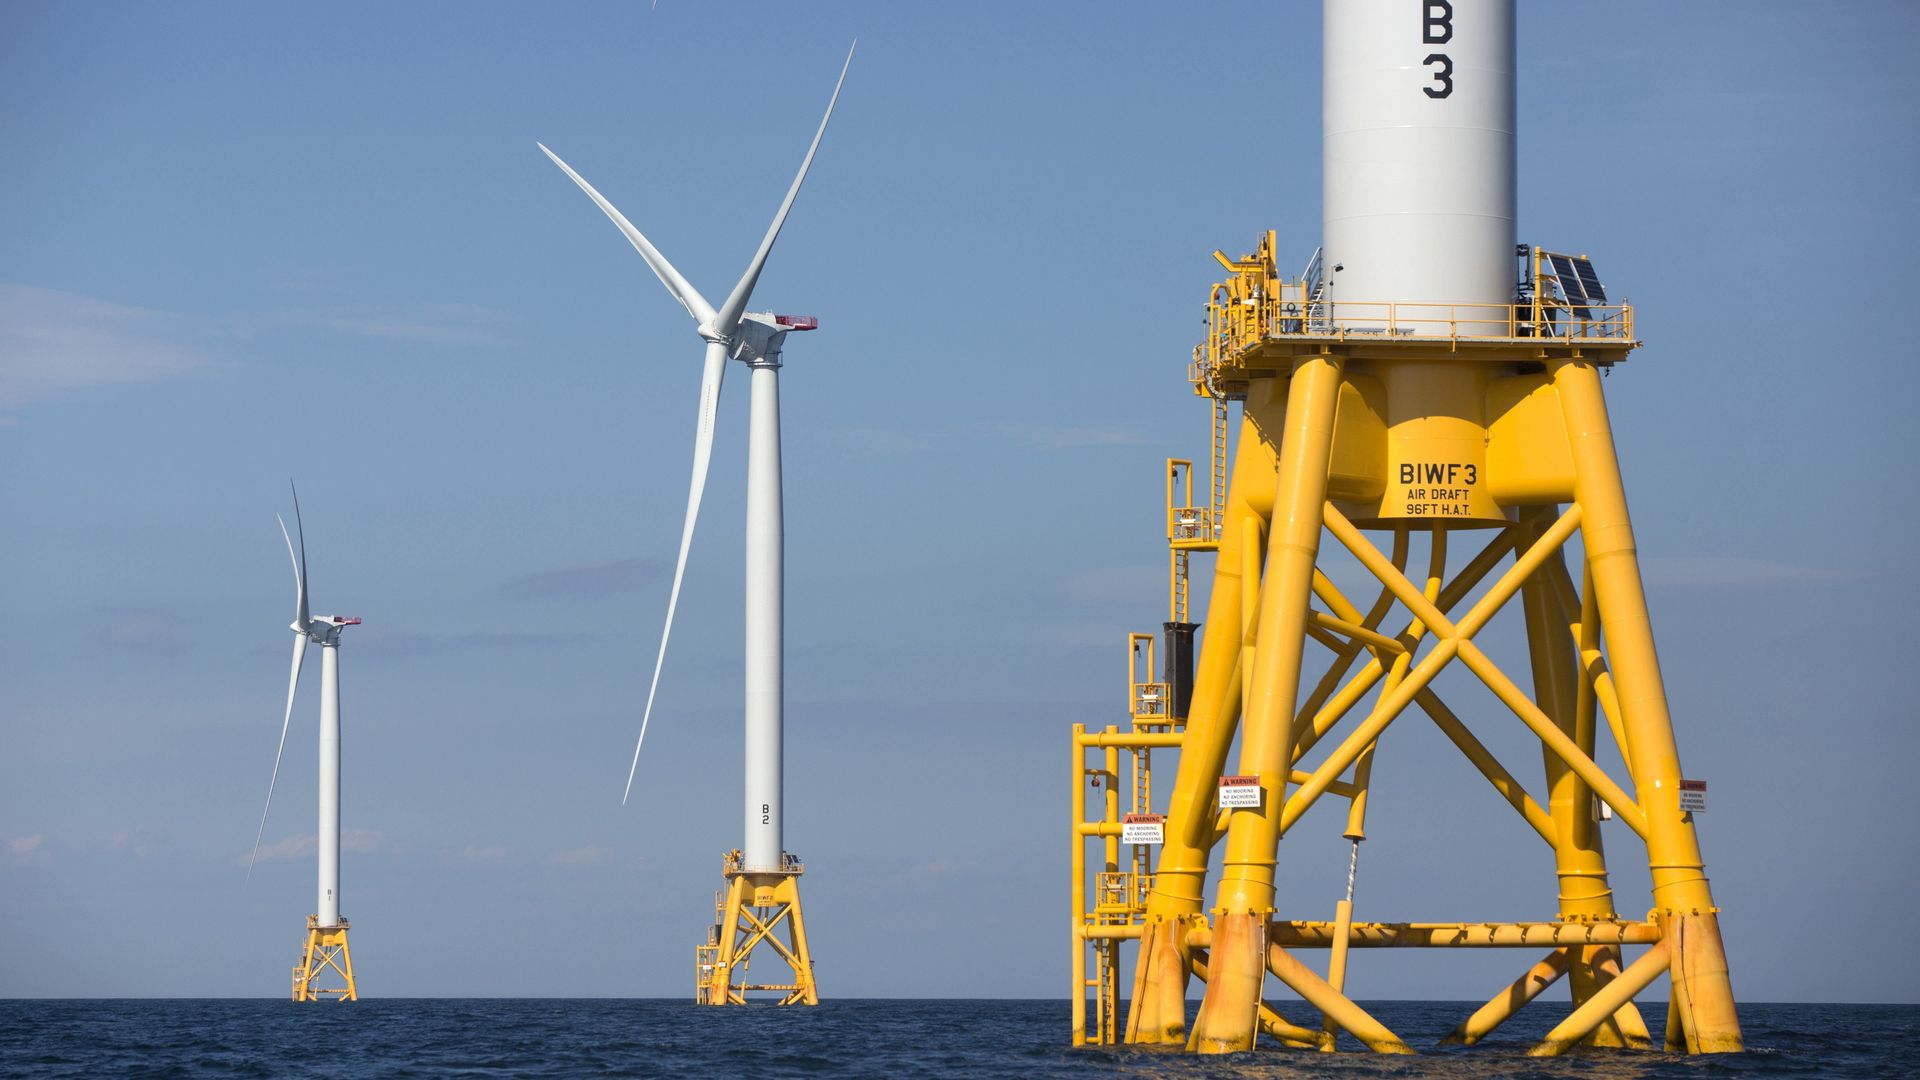 Three of Deepwater Wind's five turbines stand in the water off Block Island, R.I, the nation's first offshore wind farm.